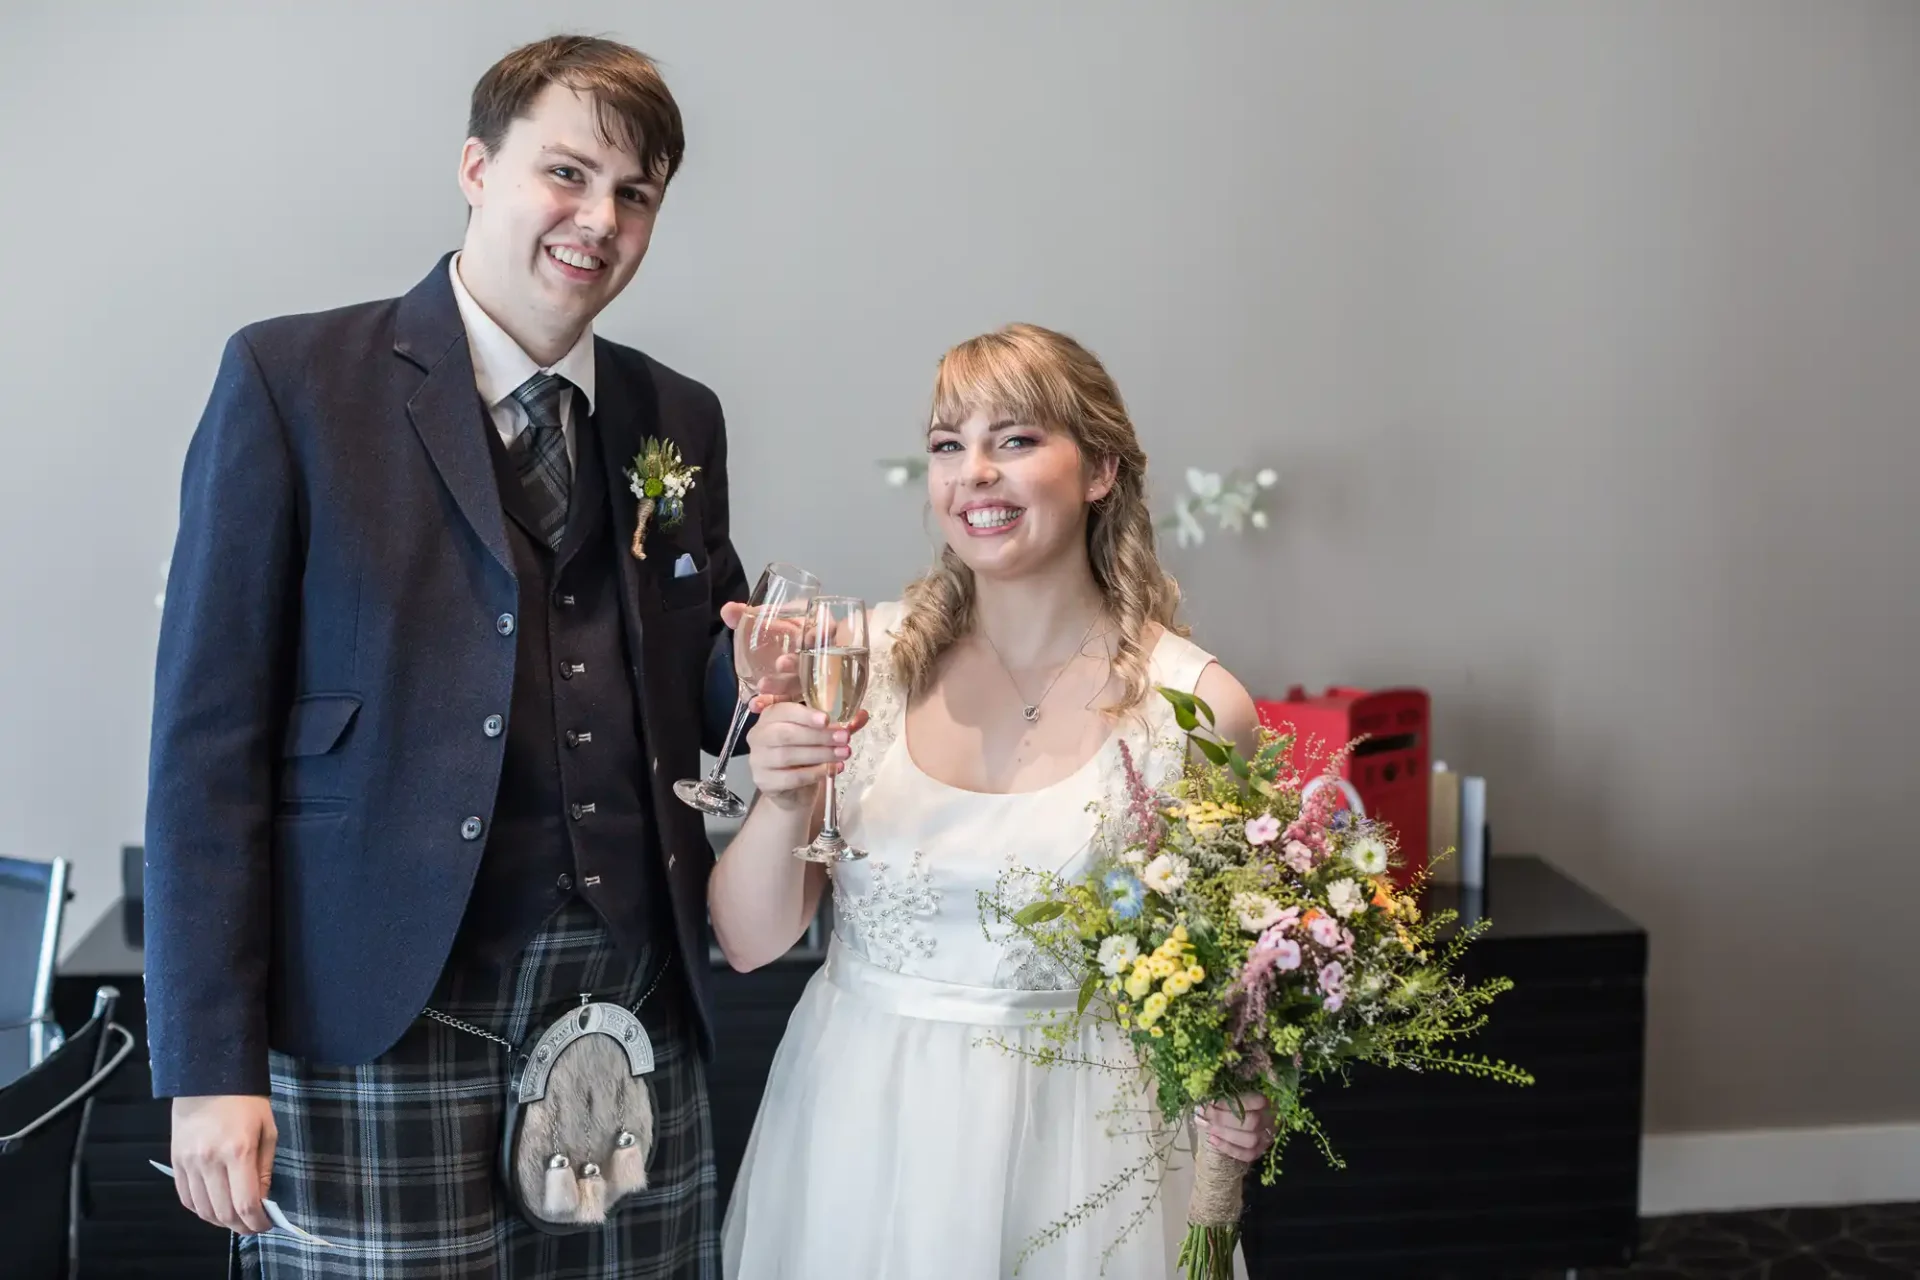 A smiling bride and groom in wedding attire, the groom in a kilt, holding a glass and a bouquet, standing indoors.